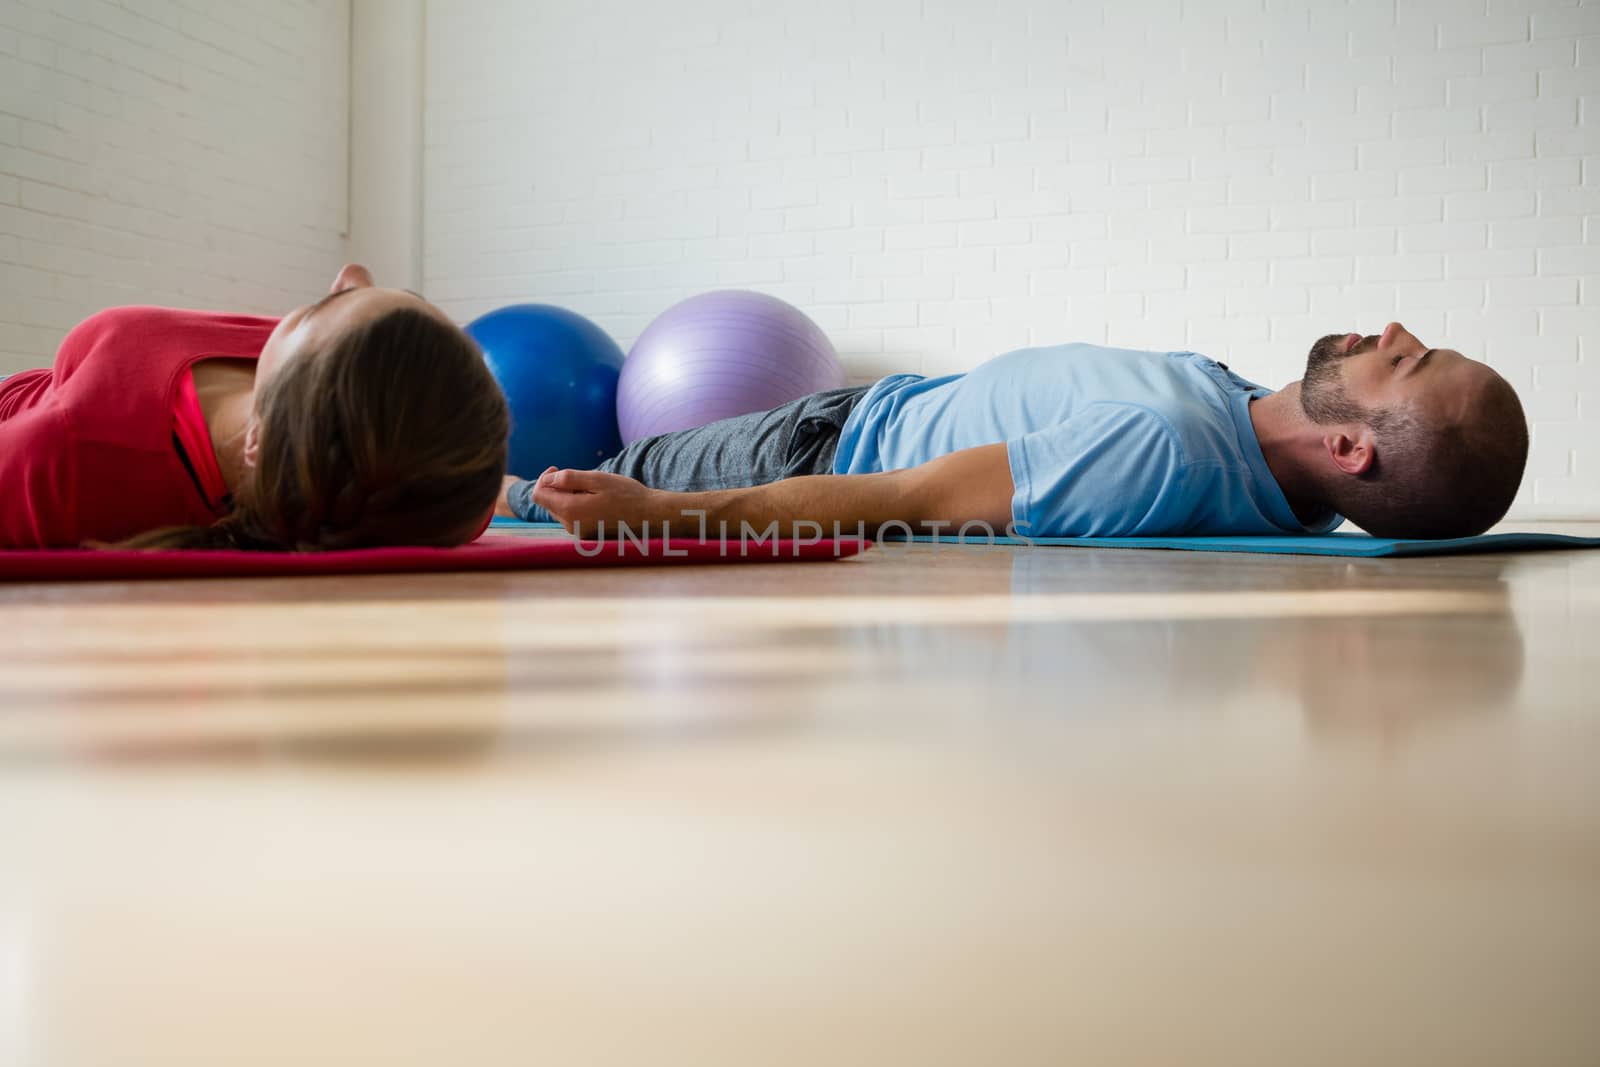 Instructor and student exercising while lying on mat in studio by Wavebreakmedia